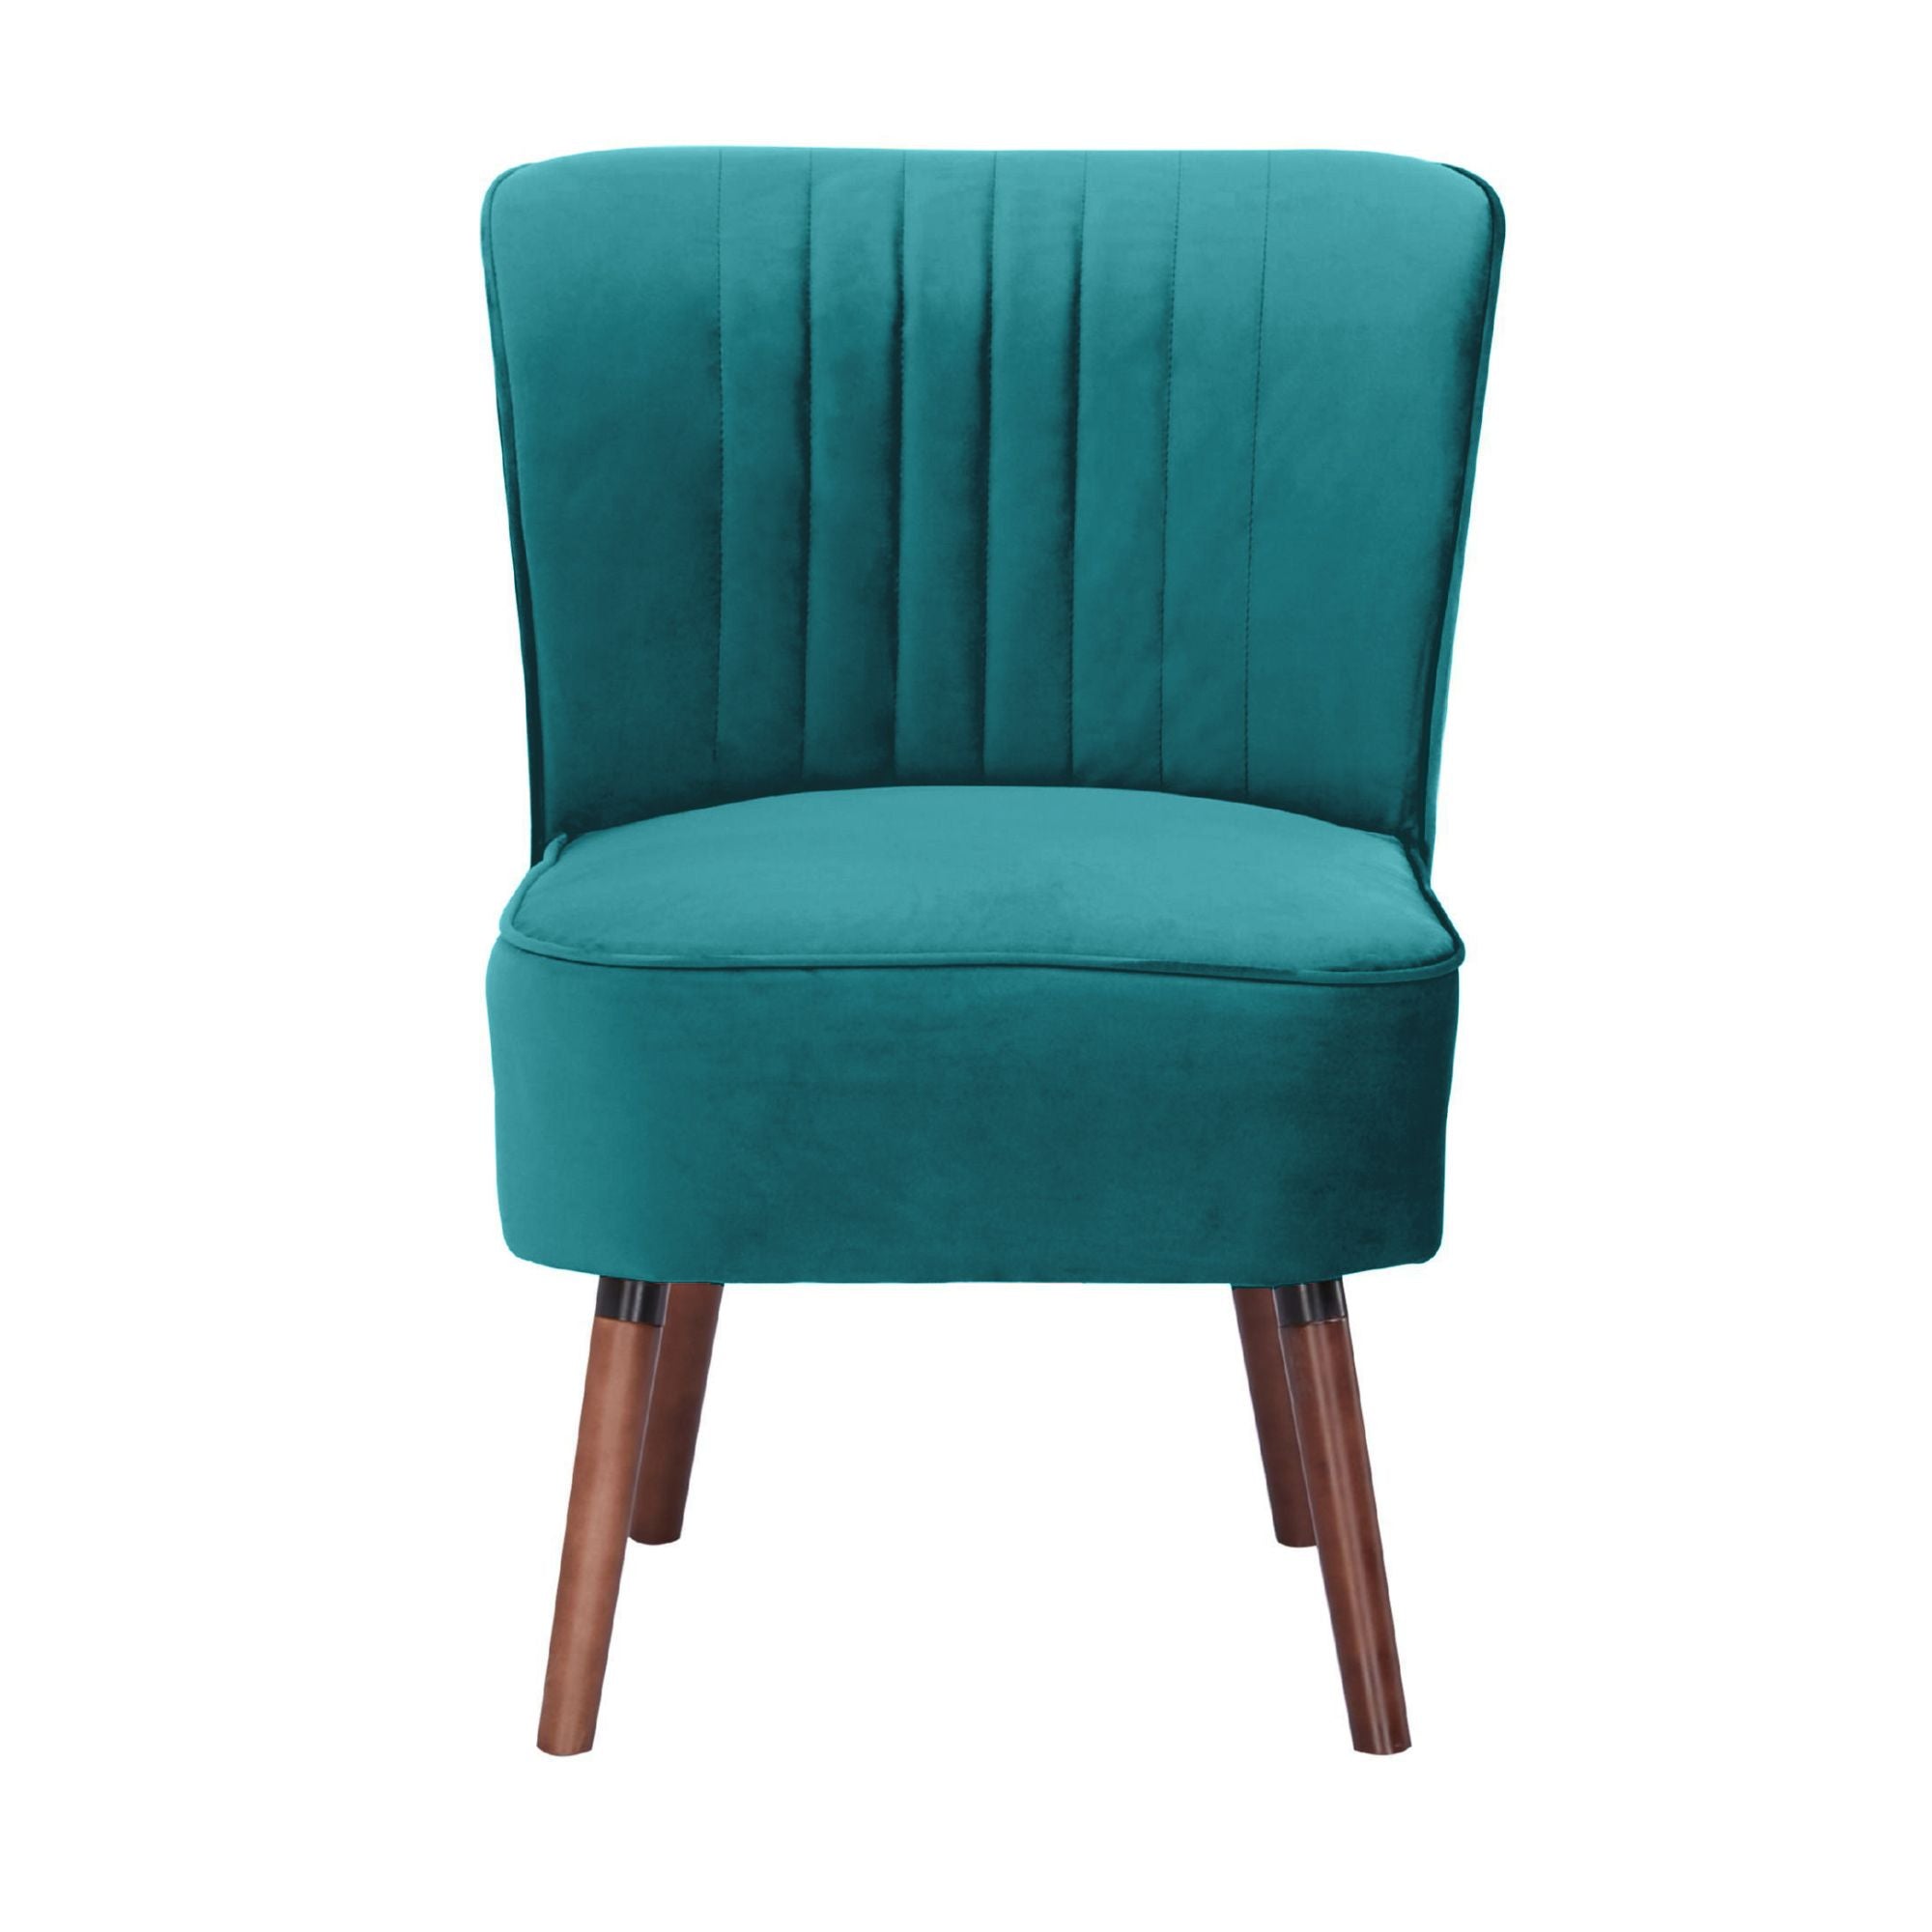 Mid Blue Upholstered Accent Chair, Durable Wooden Frame